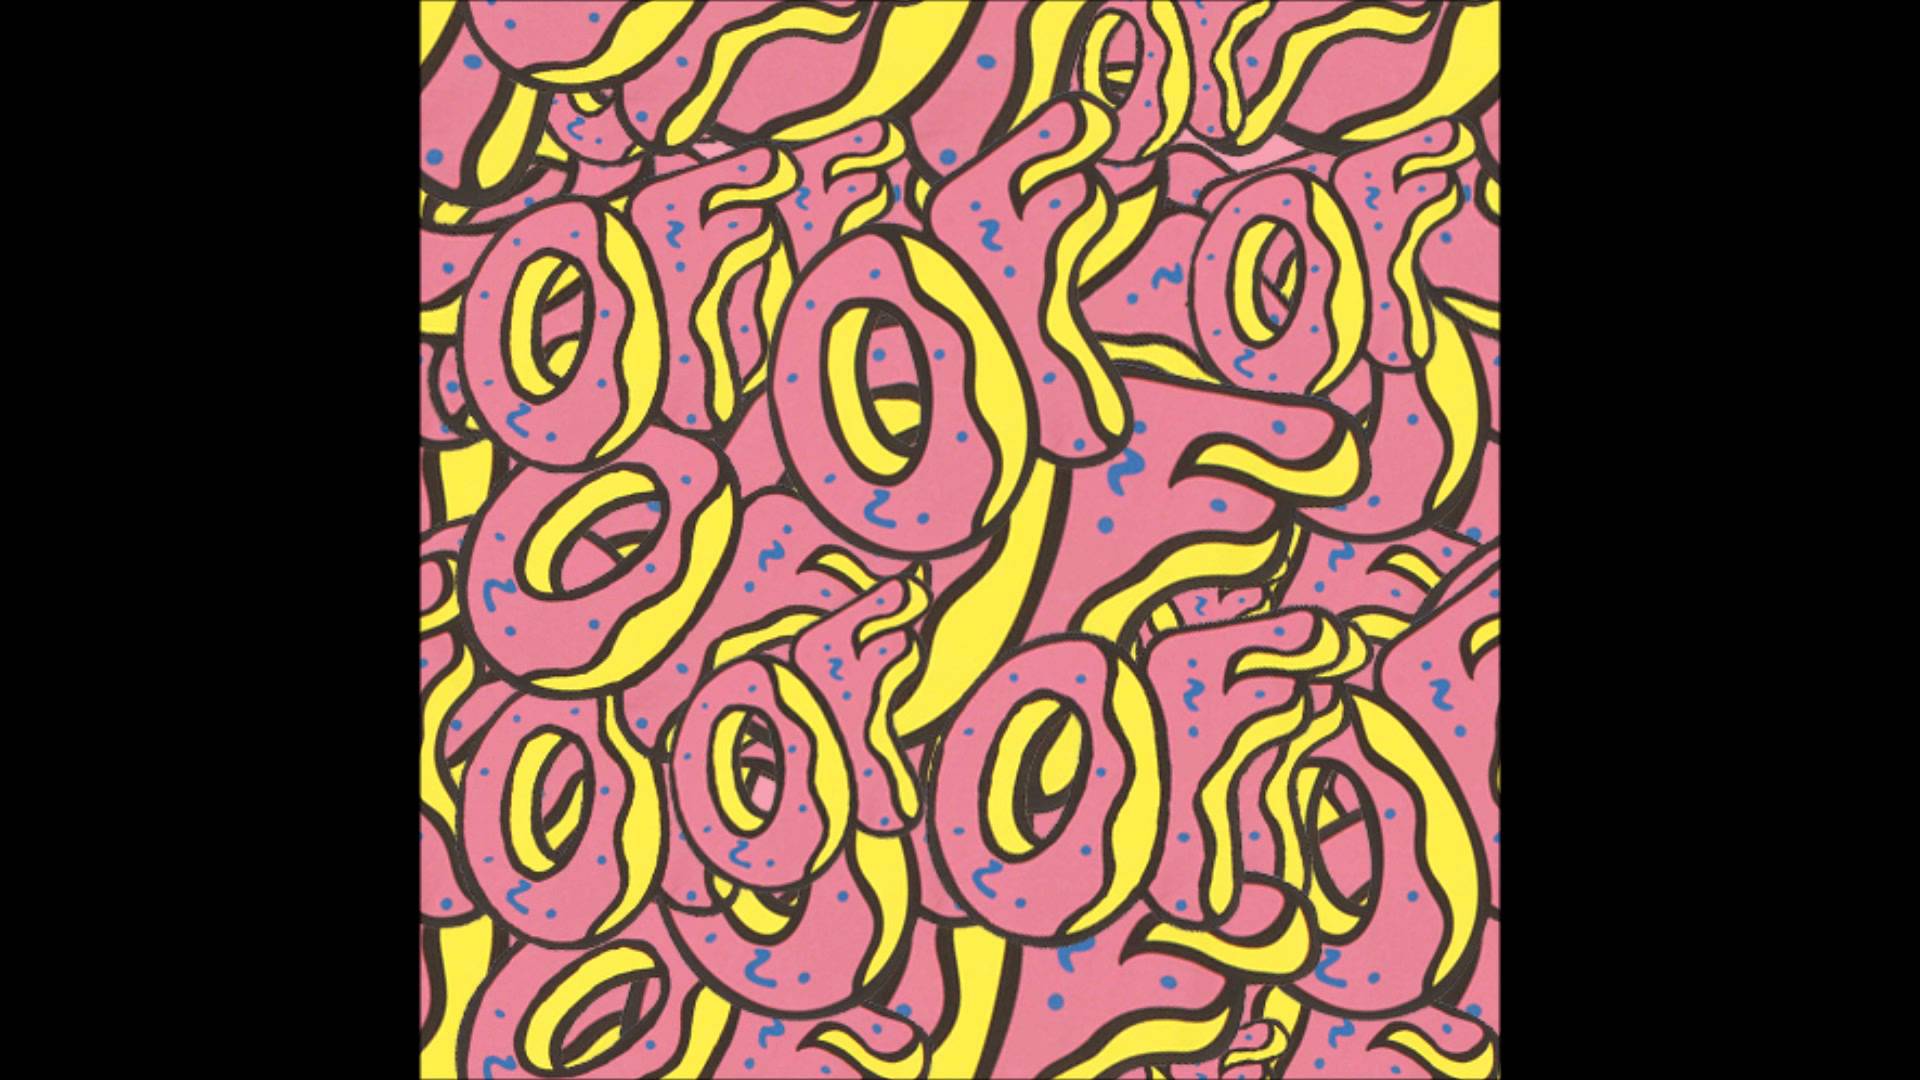 Related Pictures Odd Future Donuts Wallpaper Car